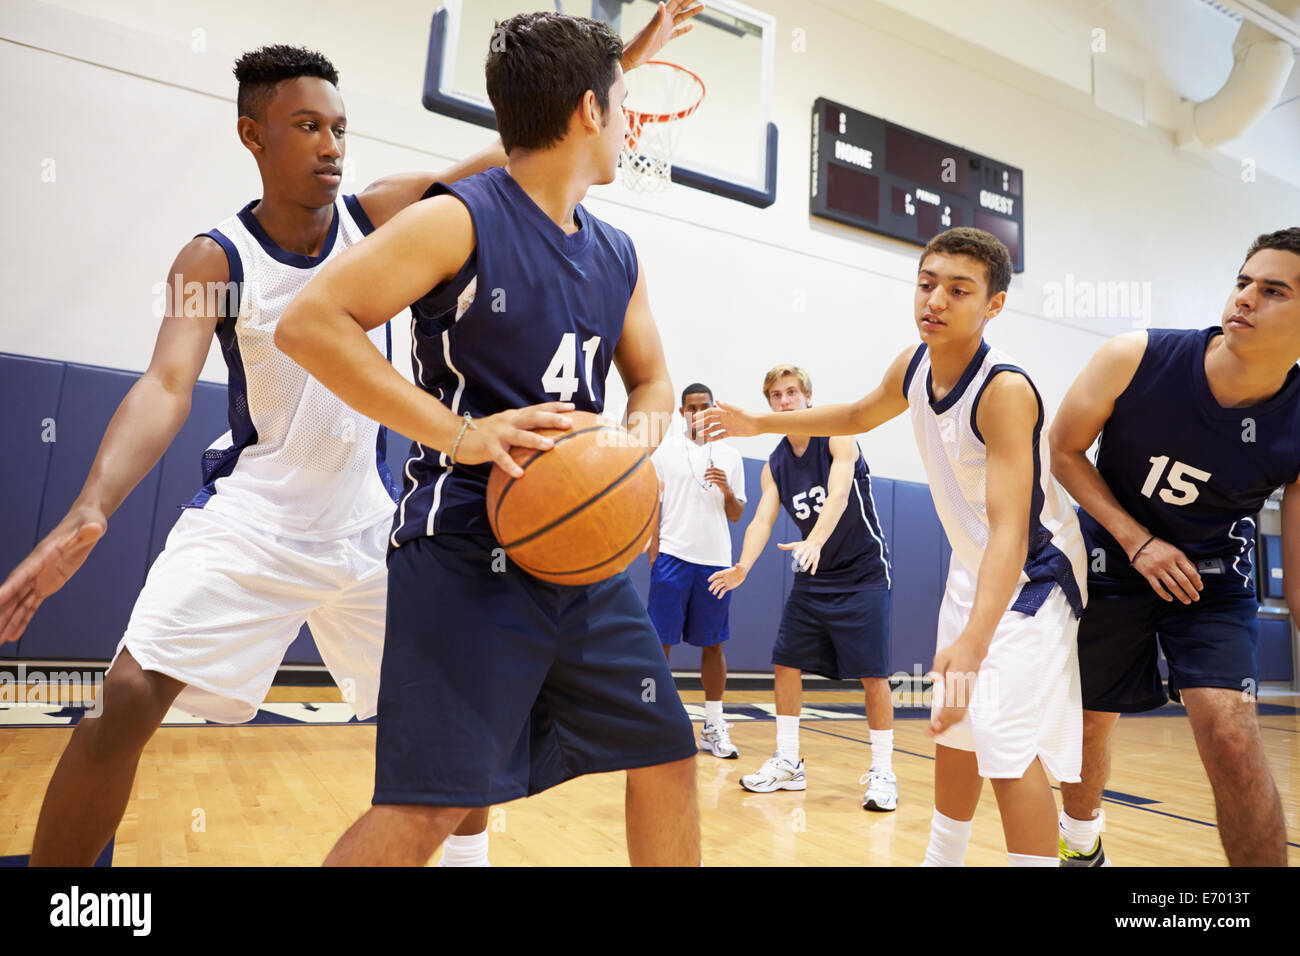 Male High School Basketball Team Playing Game Stock Photo